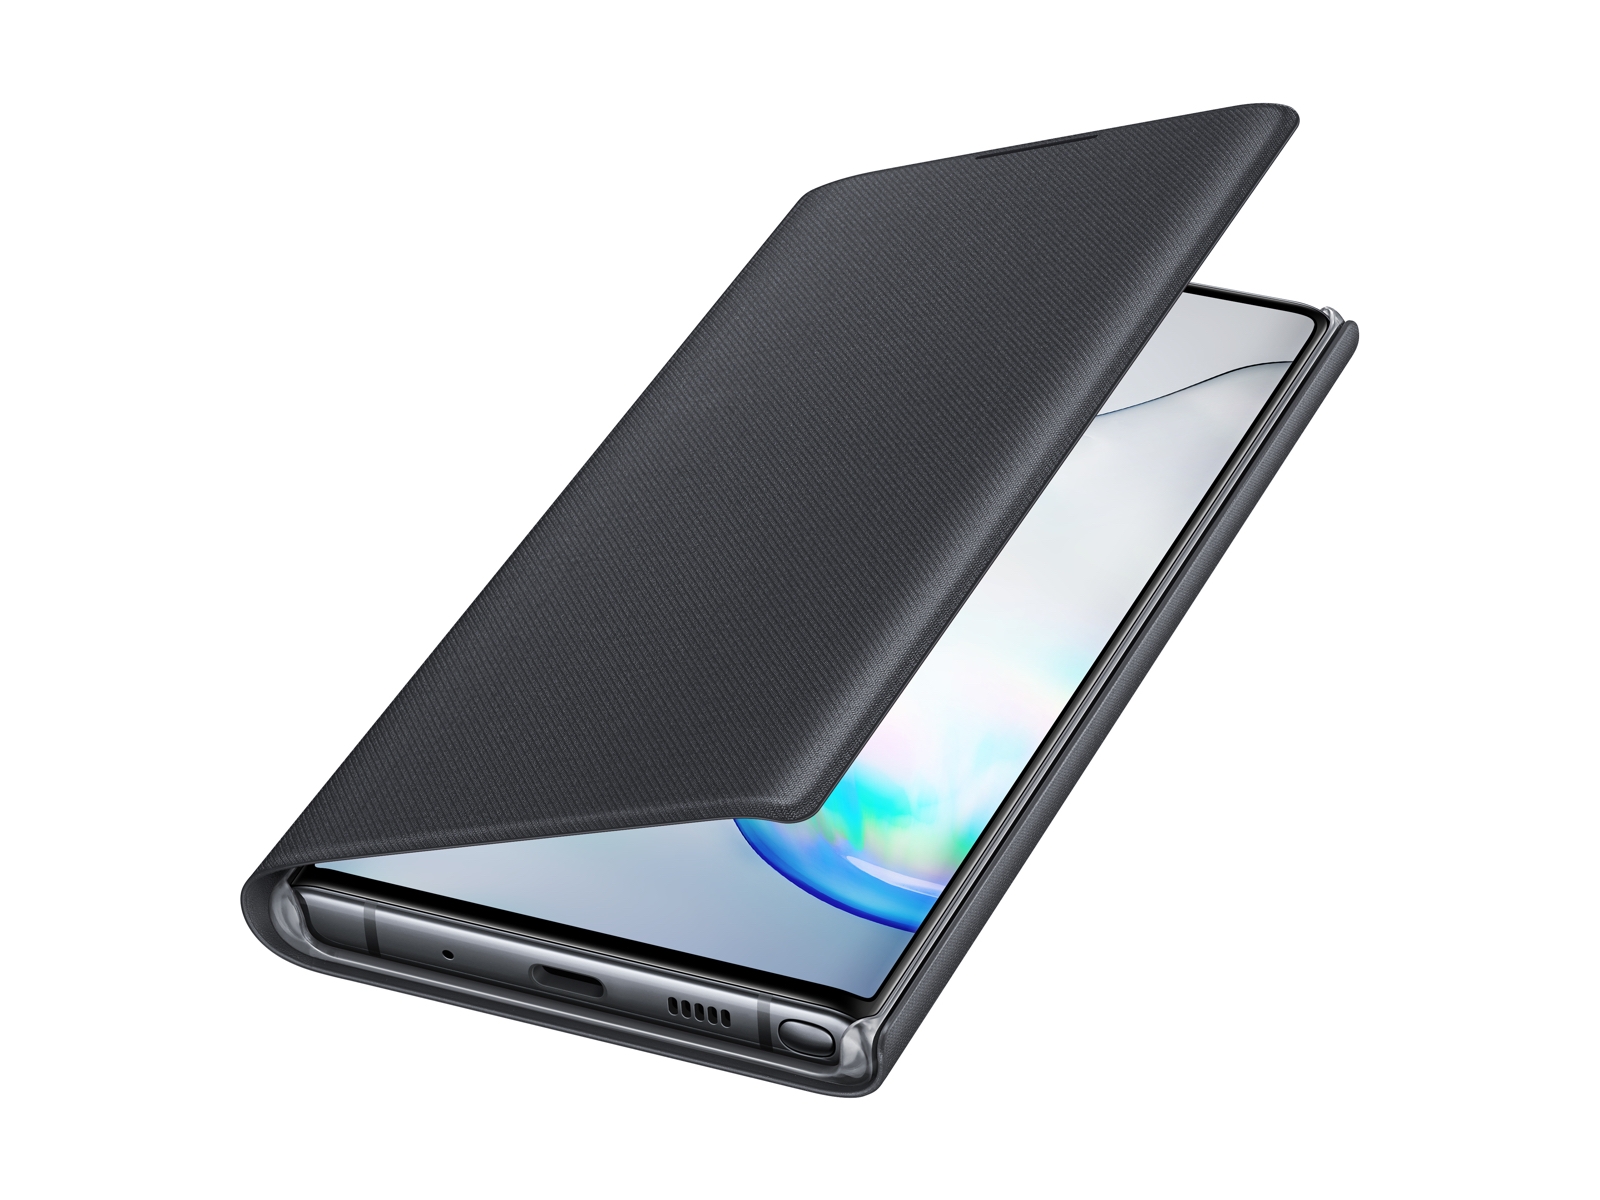 Thumbnail image of Galaxy Note10 LED Wallet Cover, Black